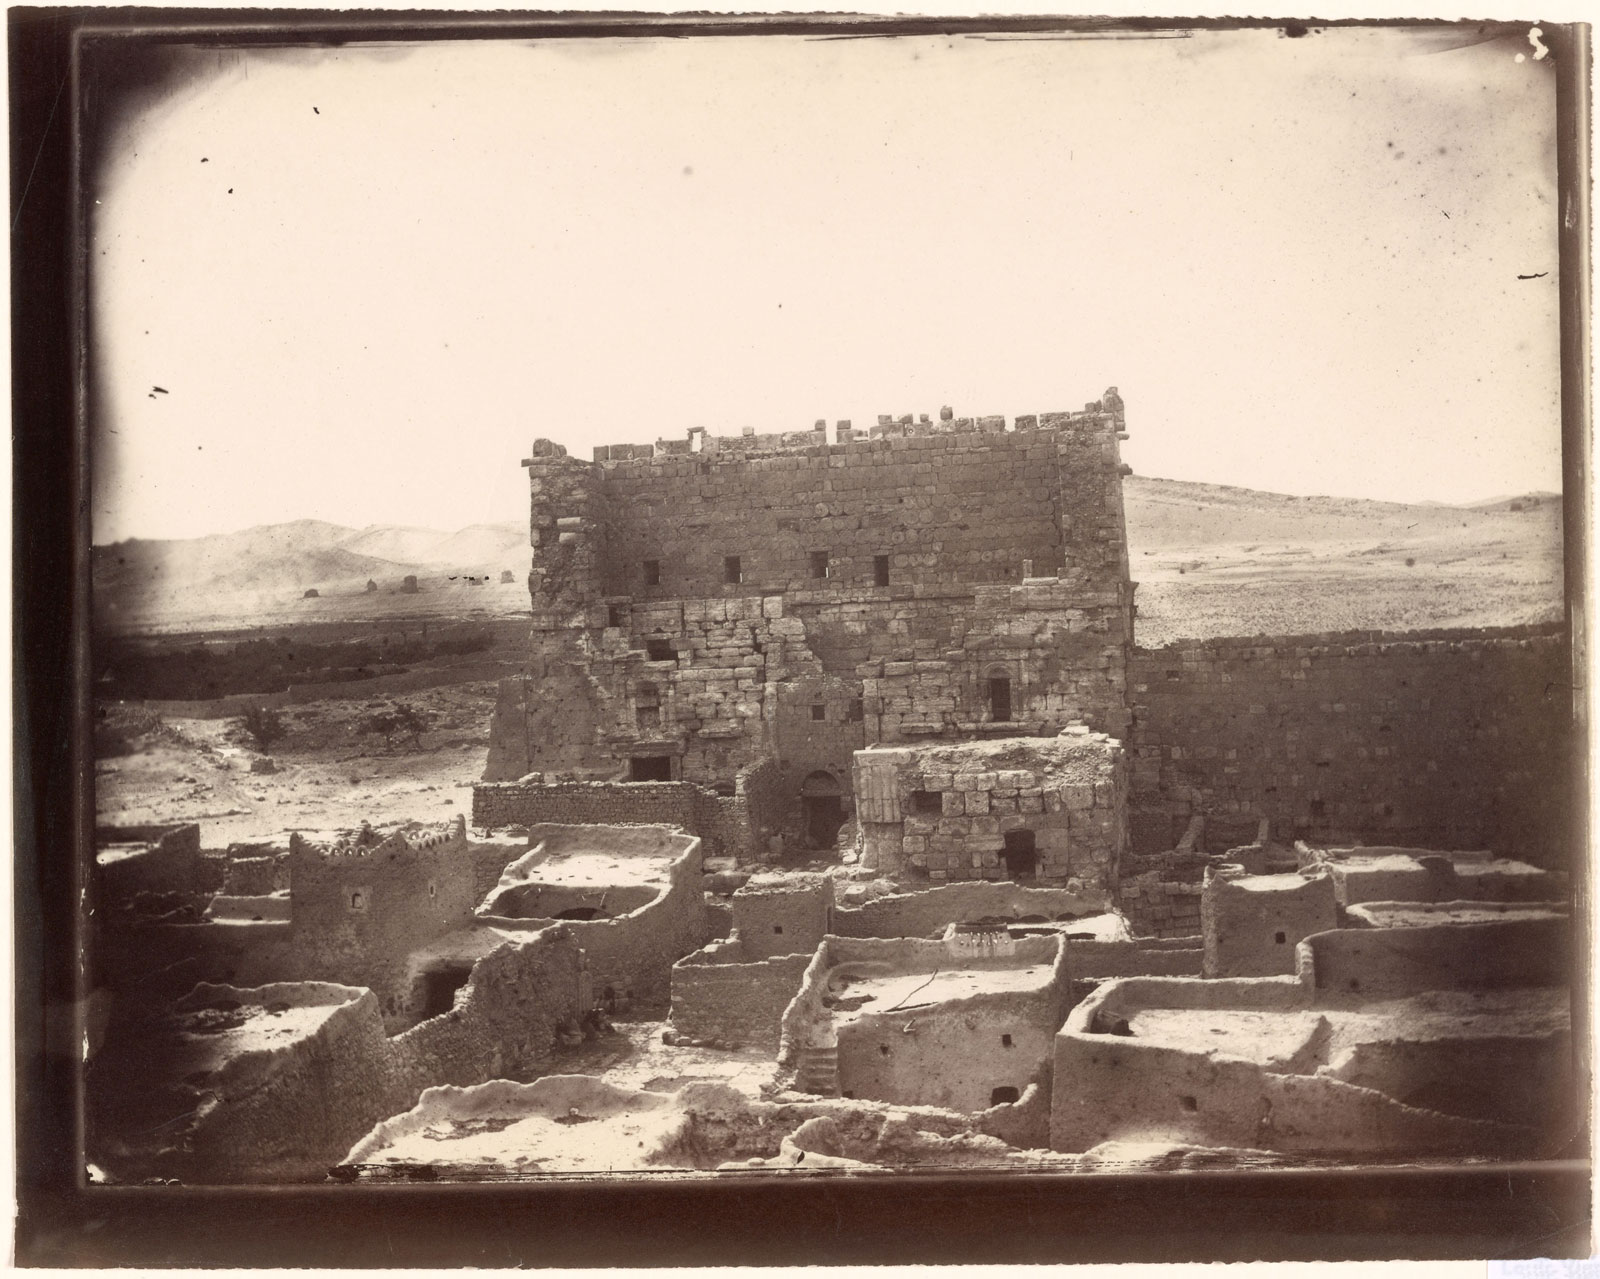 The gate of the courtyard of the Temple of Bel, Palmyra, photographed by Louis Vines, 1864